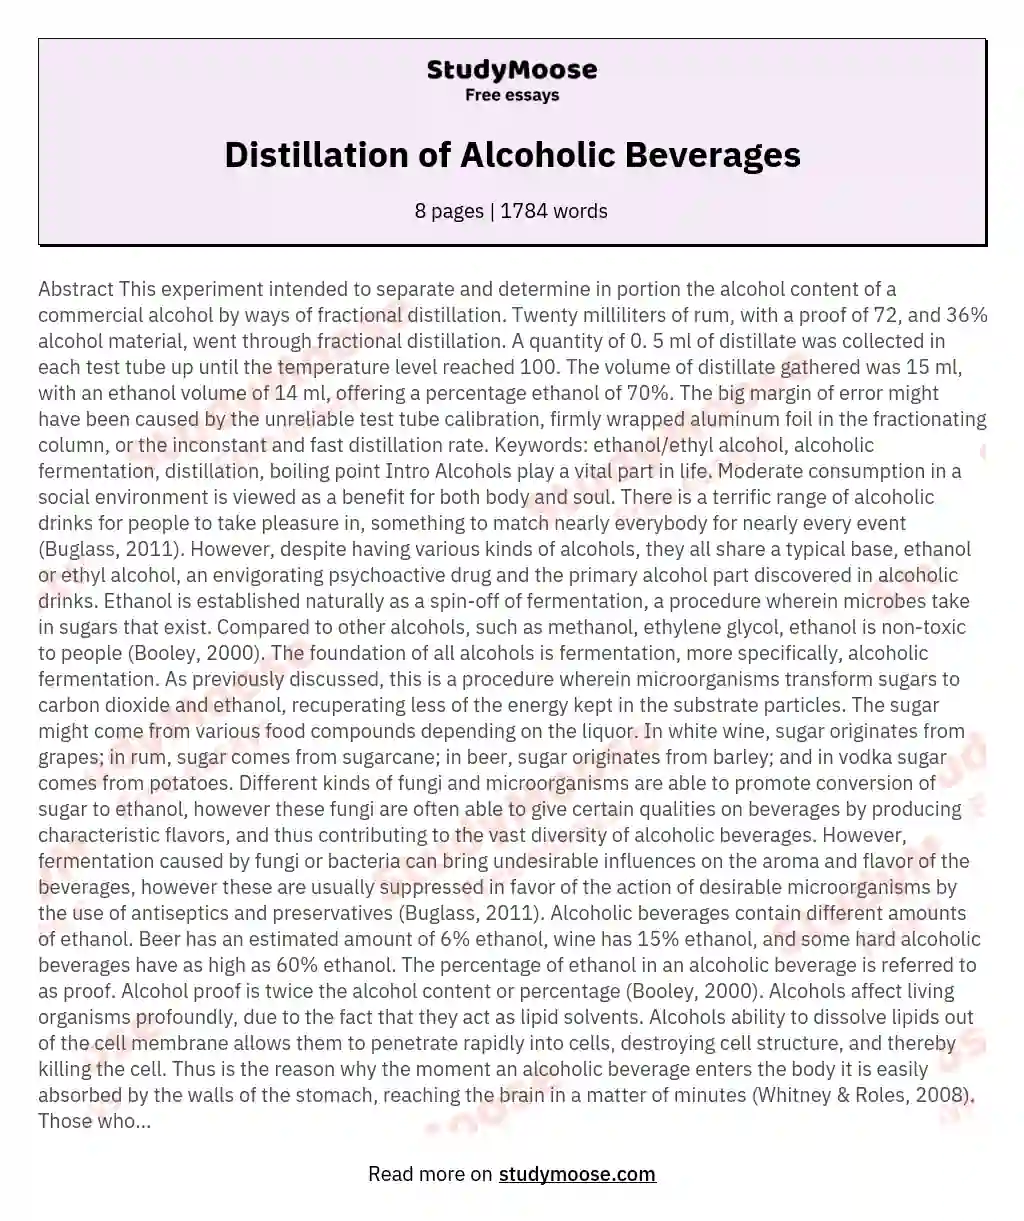 an essay on alcoholic beverages